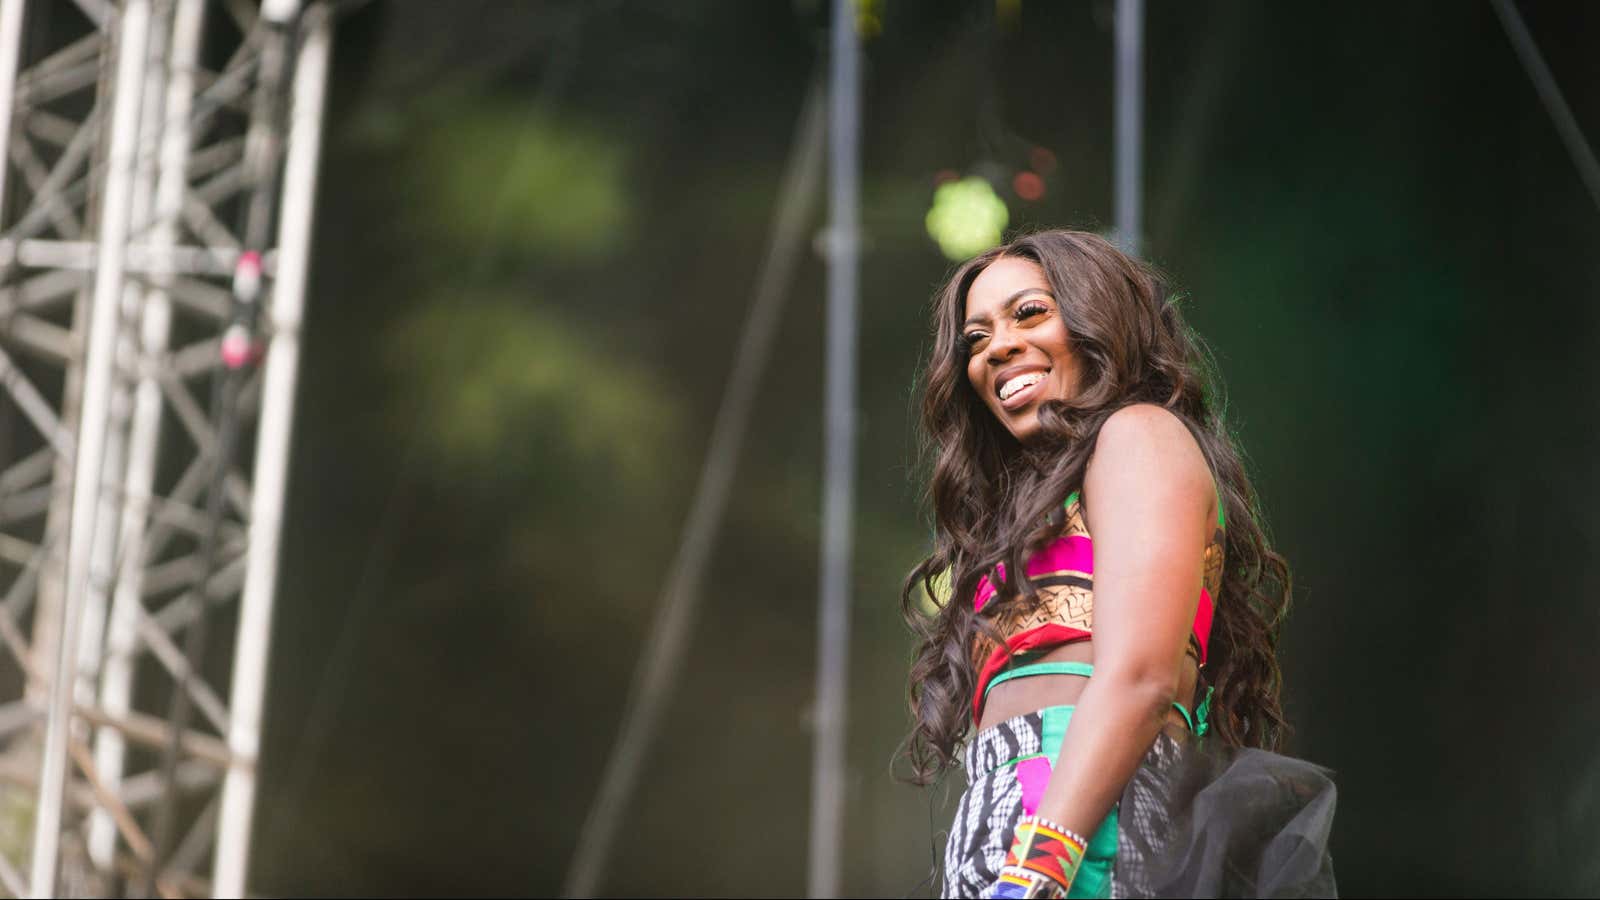 Tiwa Savage, one of the stars on Mavin Records, the Nigerian music label in which private equity investors recently took a stake